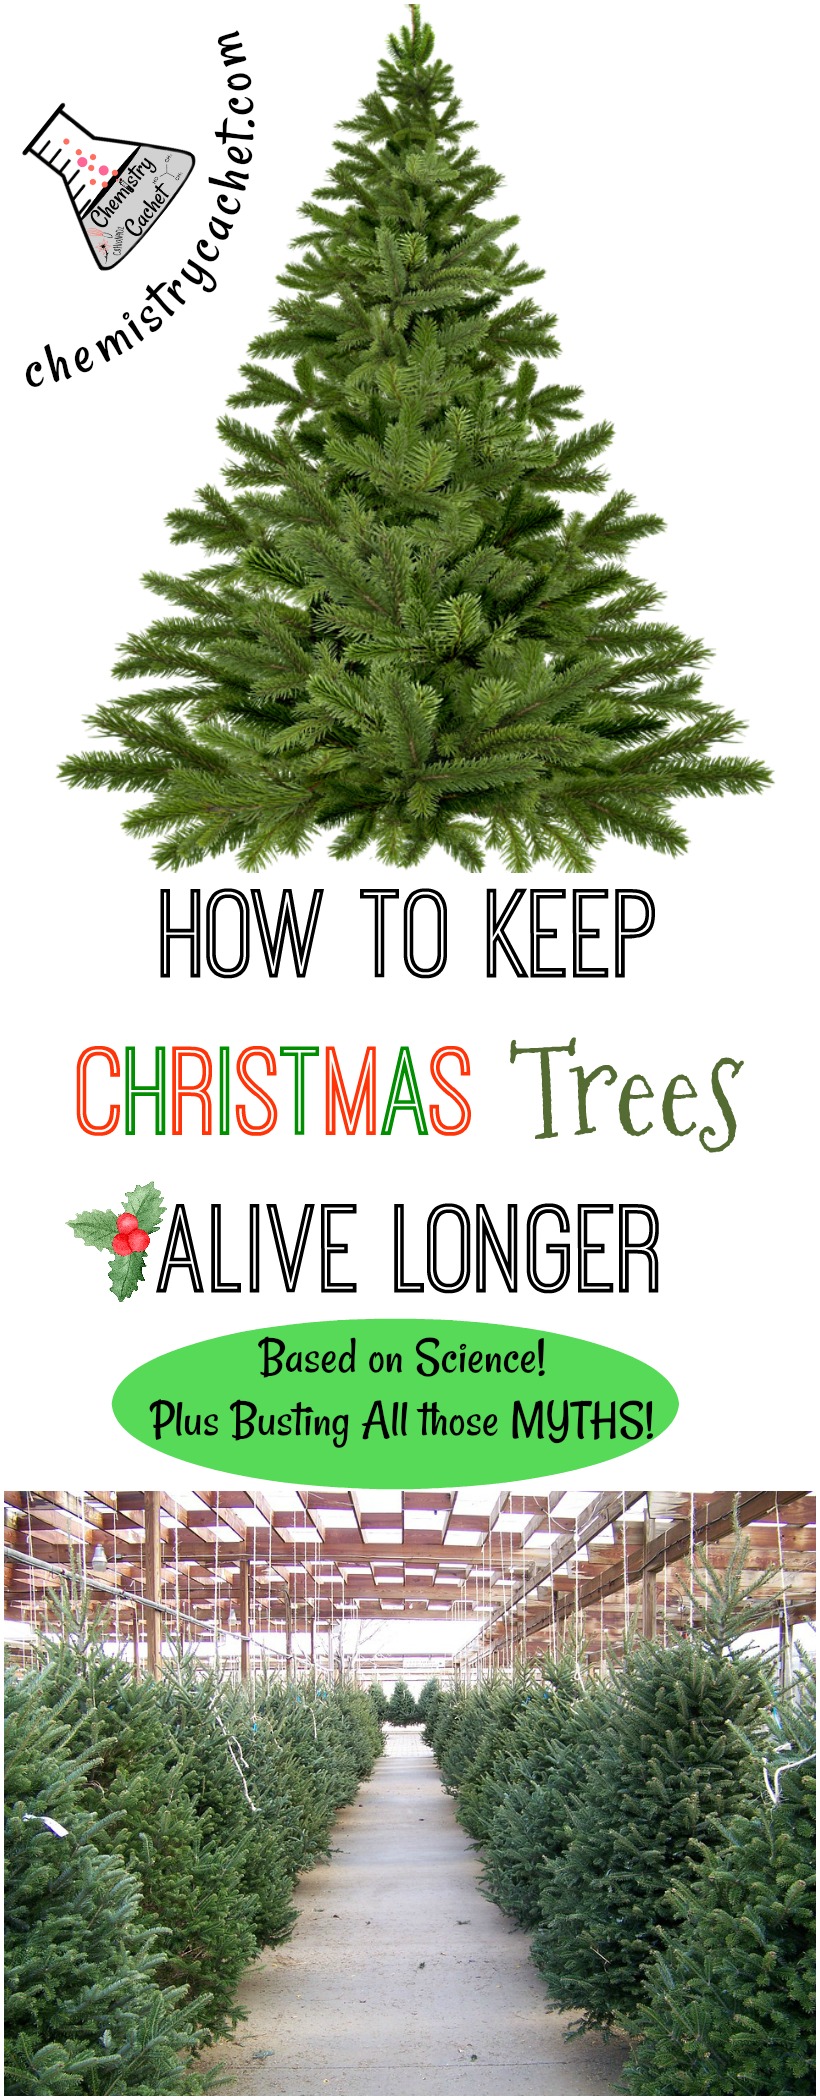 How to Keep Christmas Trees Alive Longer (Based on Science!)